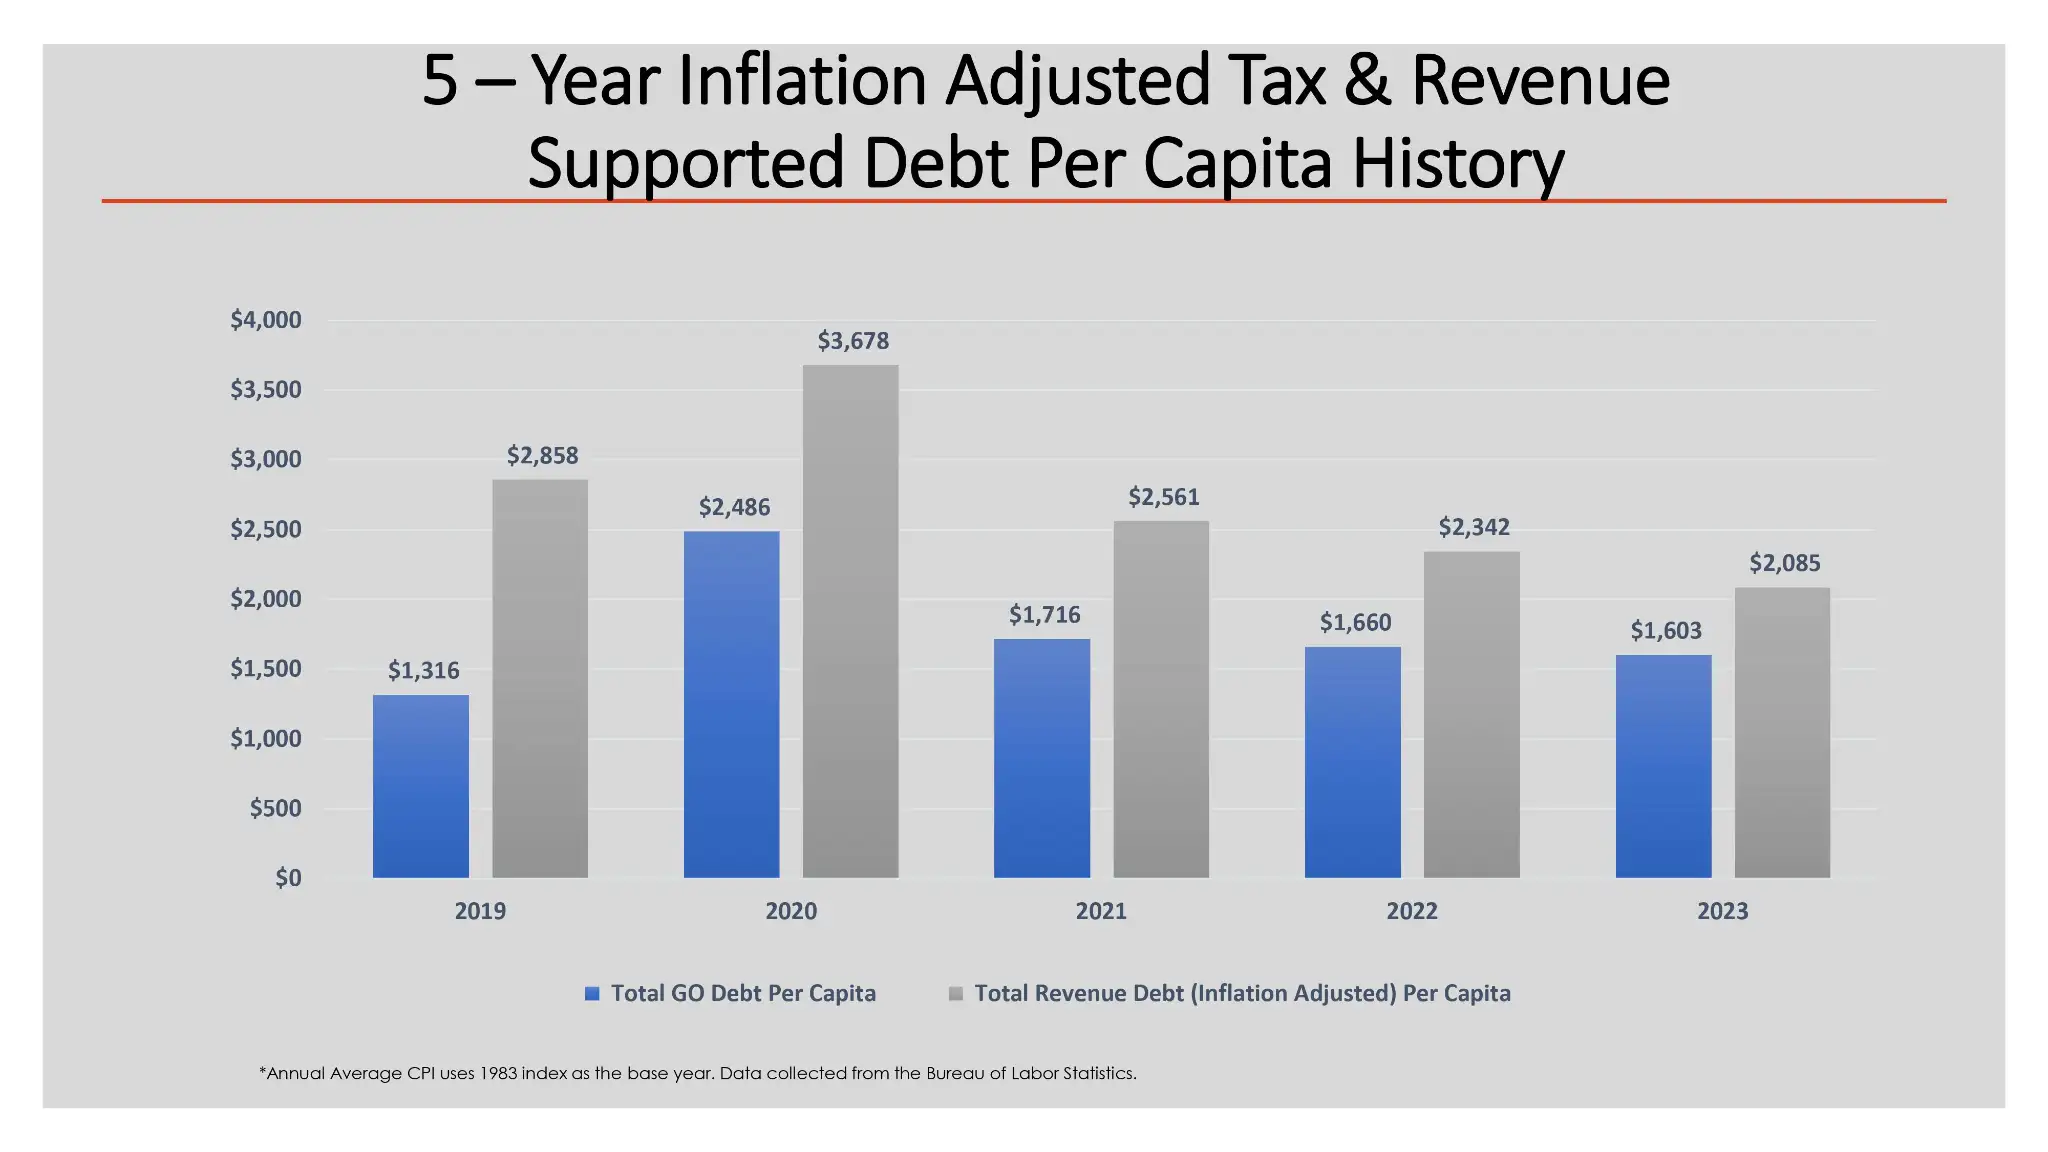 5 Year Inflation Adjusted Tax Revenue Supported Debt Per Capita History 2023